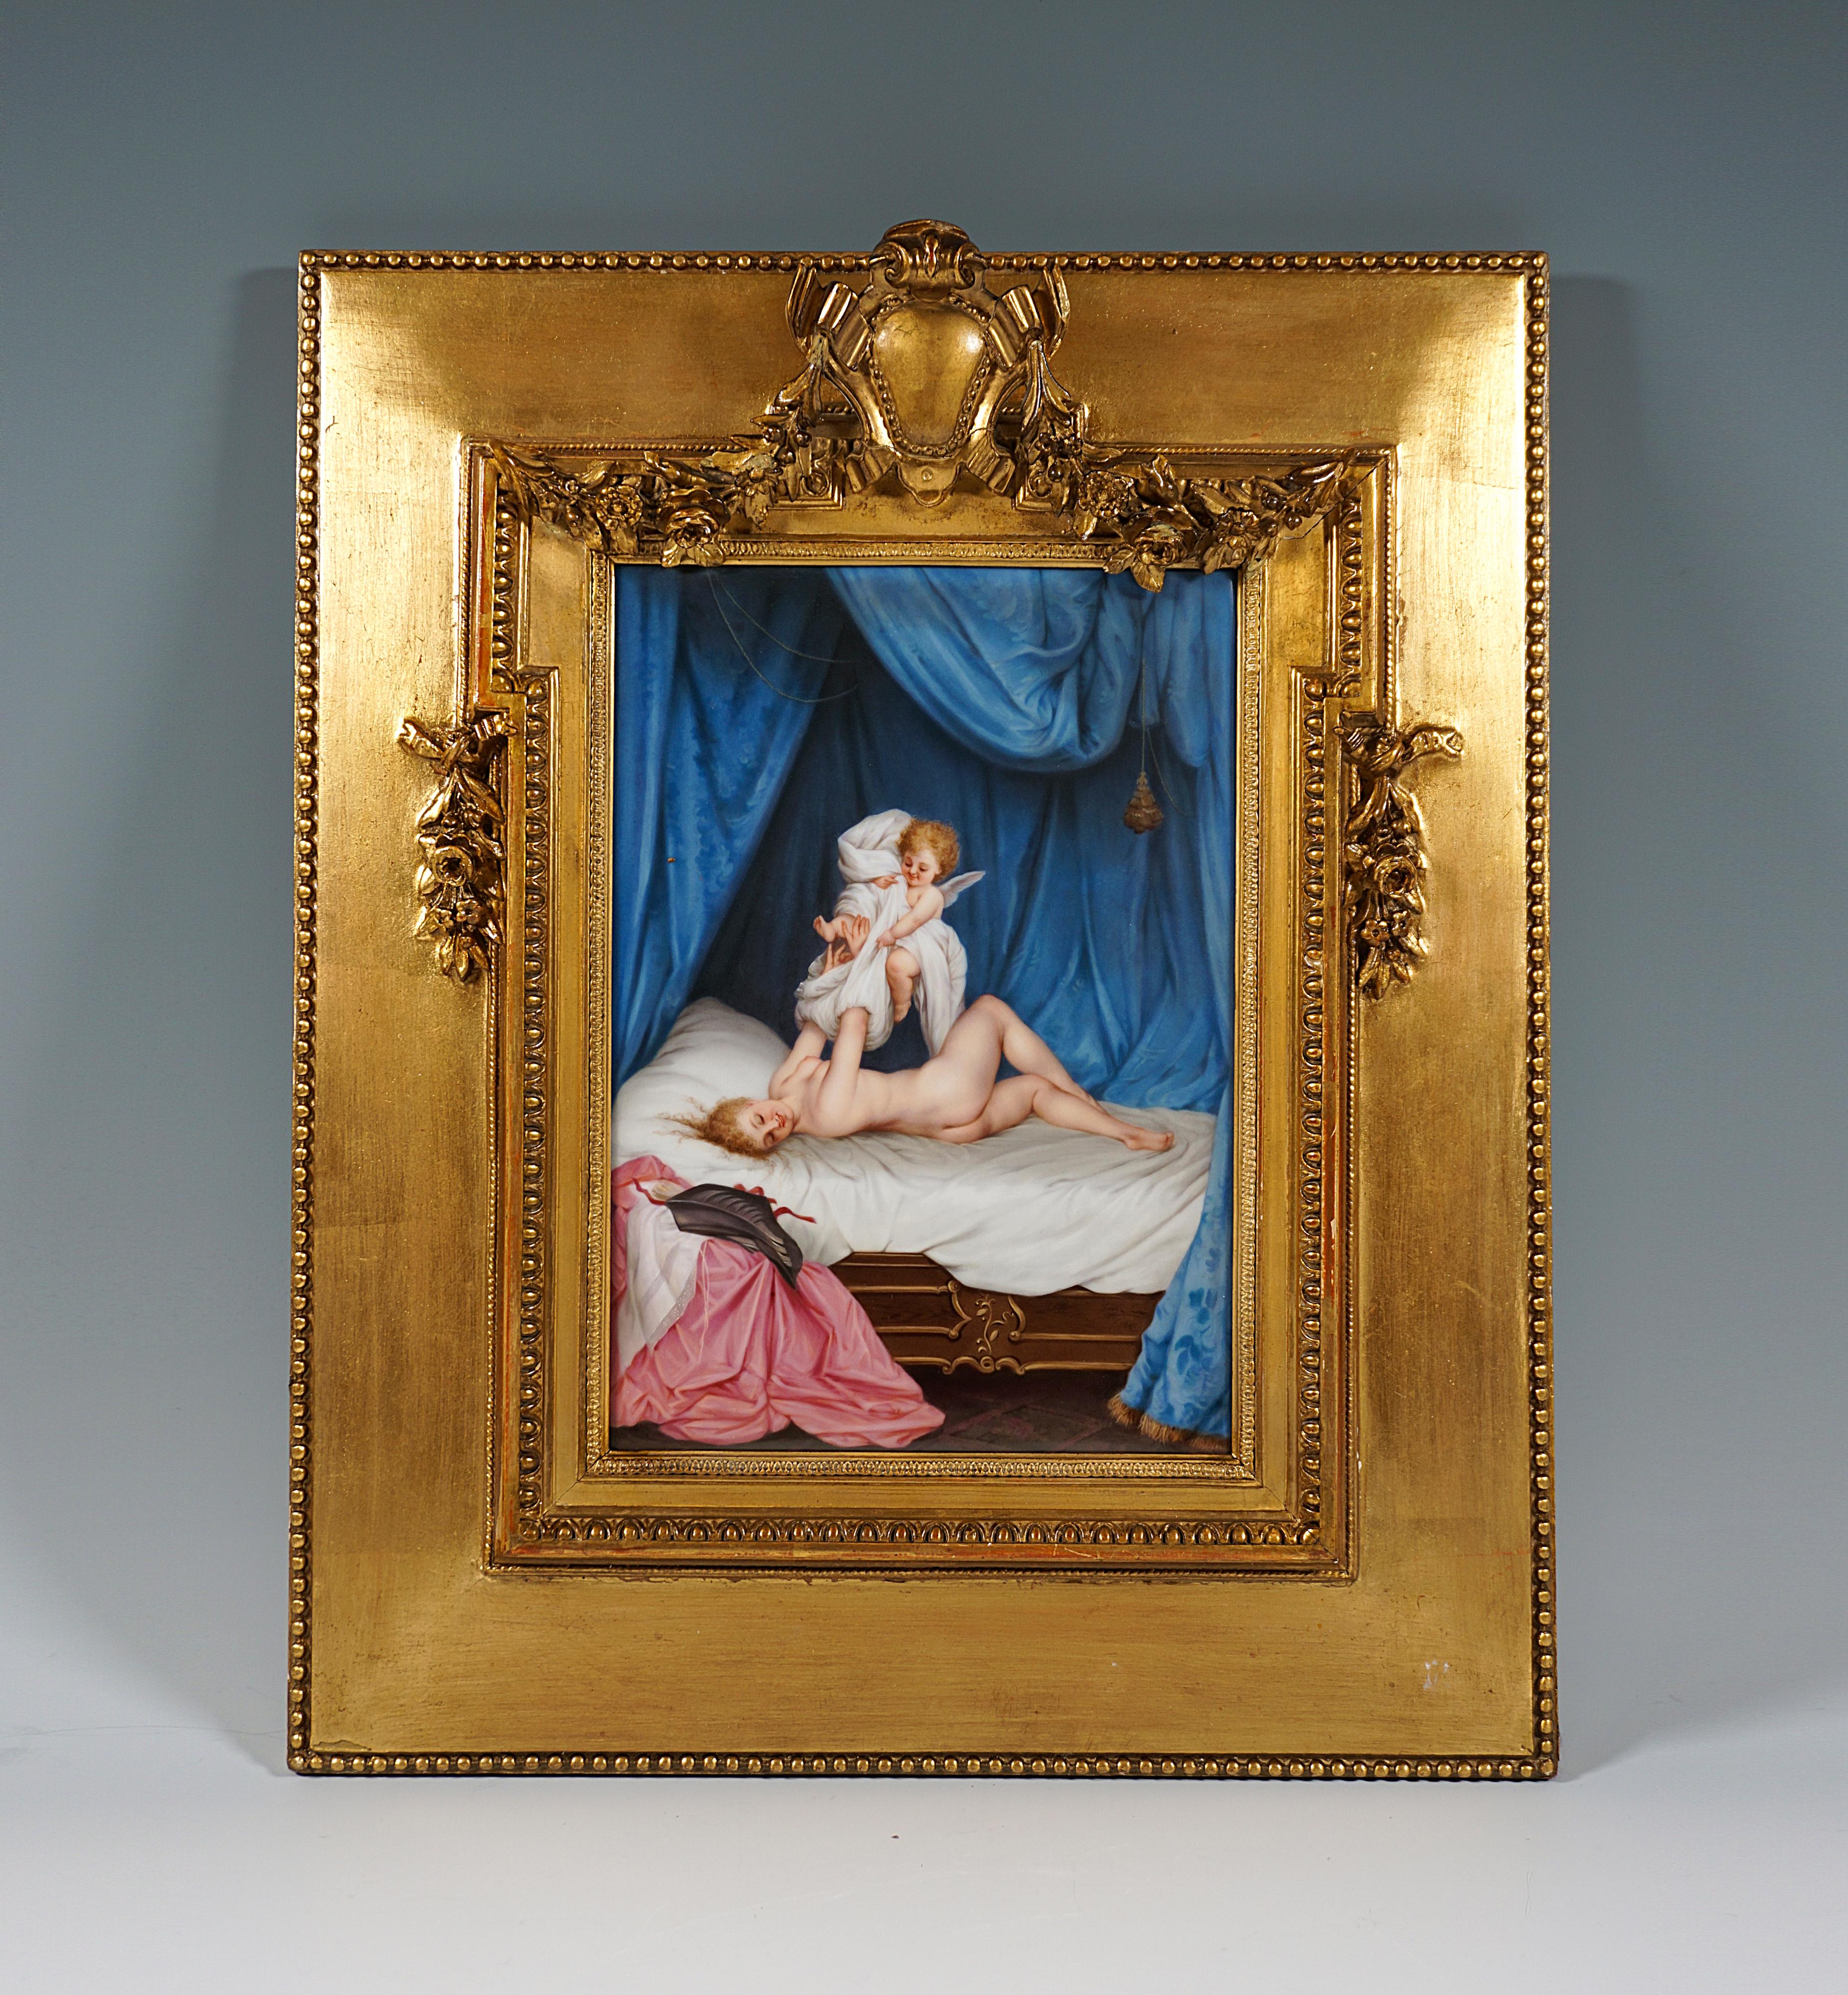 Exquisite erotic depiction of a young beautiful girl on a bed under elaborately draped canopy, being undressed by a winged cupid.
Fine polychrome painting on porcelain plaque in gilt wooden frame with pearl border and elaborately worked cartouche